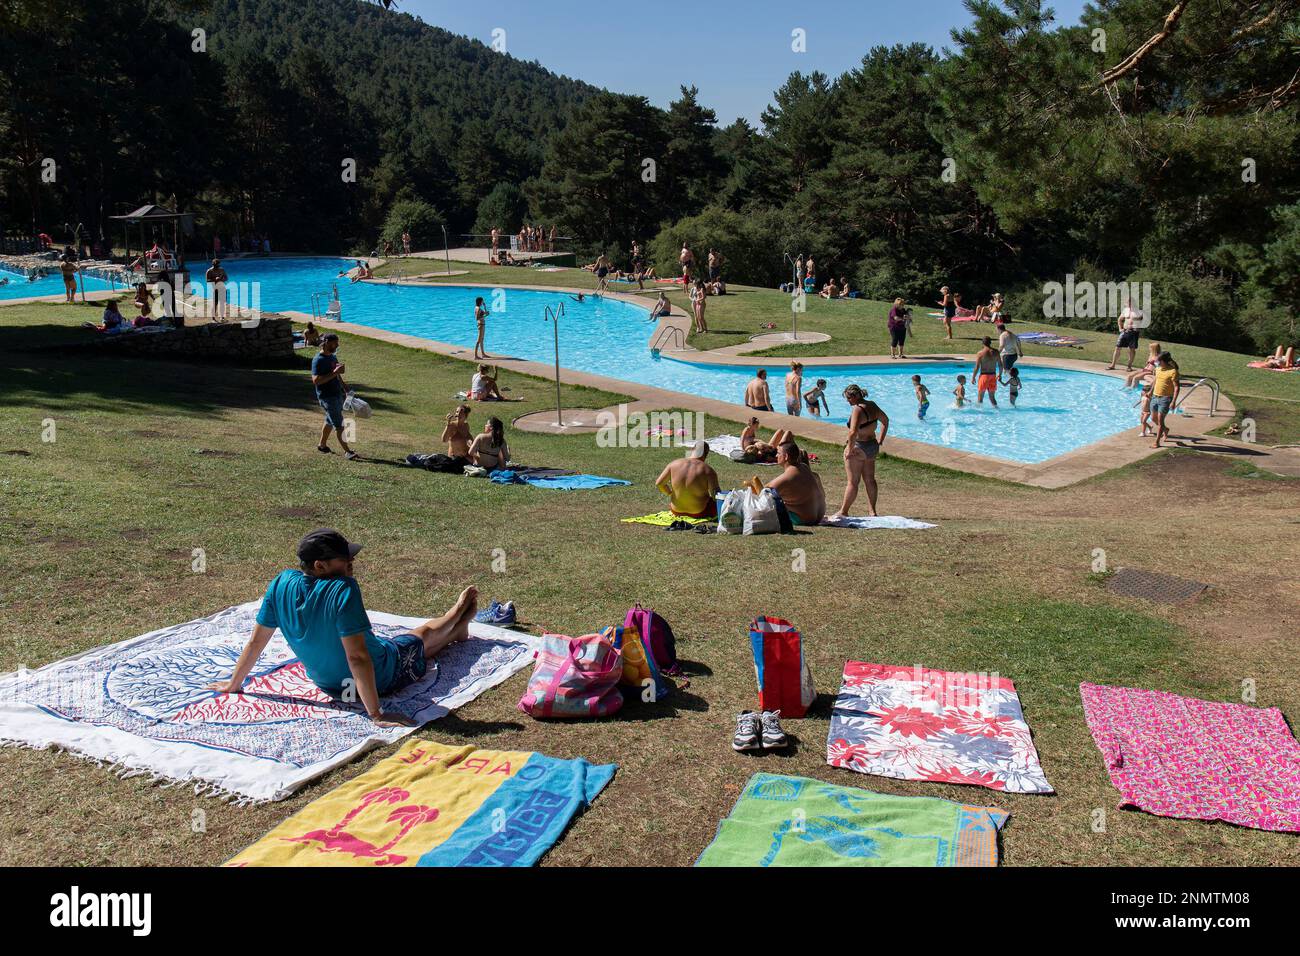 Several people enjoy a day of leisure at the swimming pools of Las Berceas,  August 14, 2021, in Cercedilla, Madrid, (Spain). These pools are located in  the Parque Recreativo de Las Berceas.